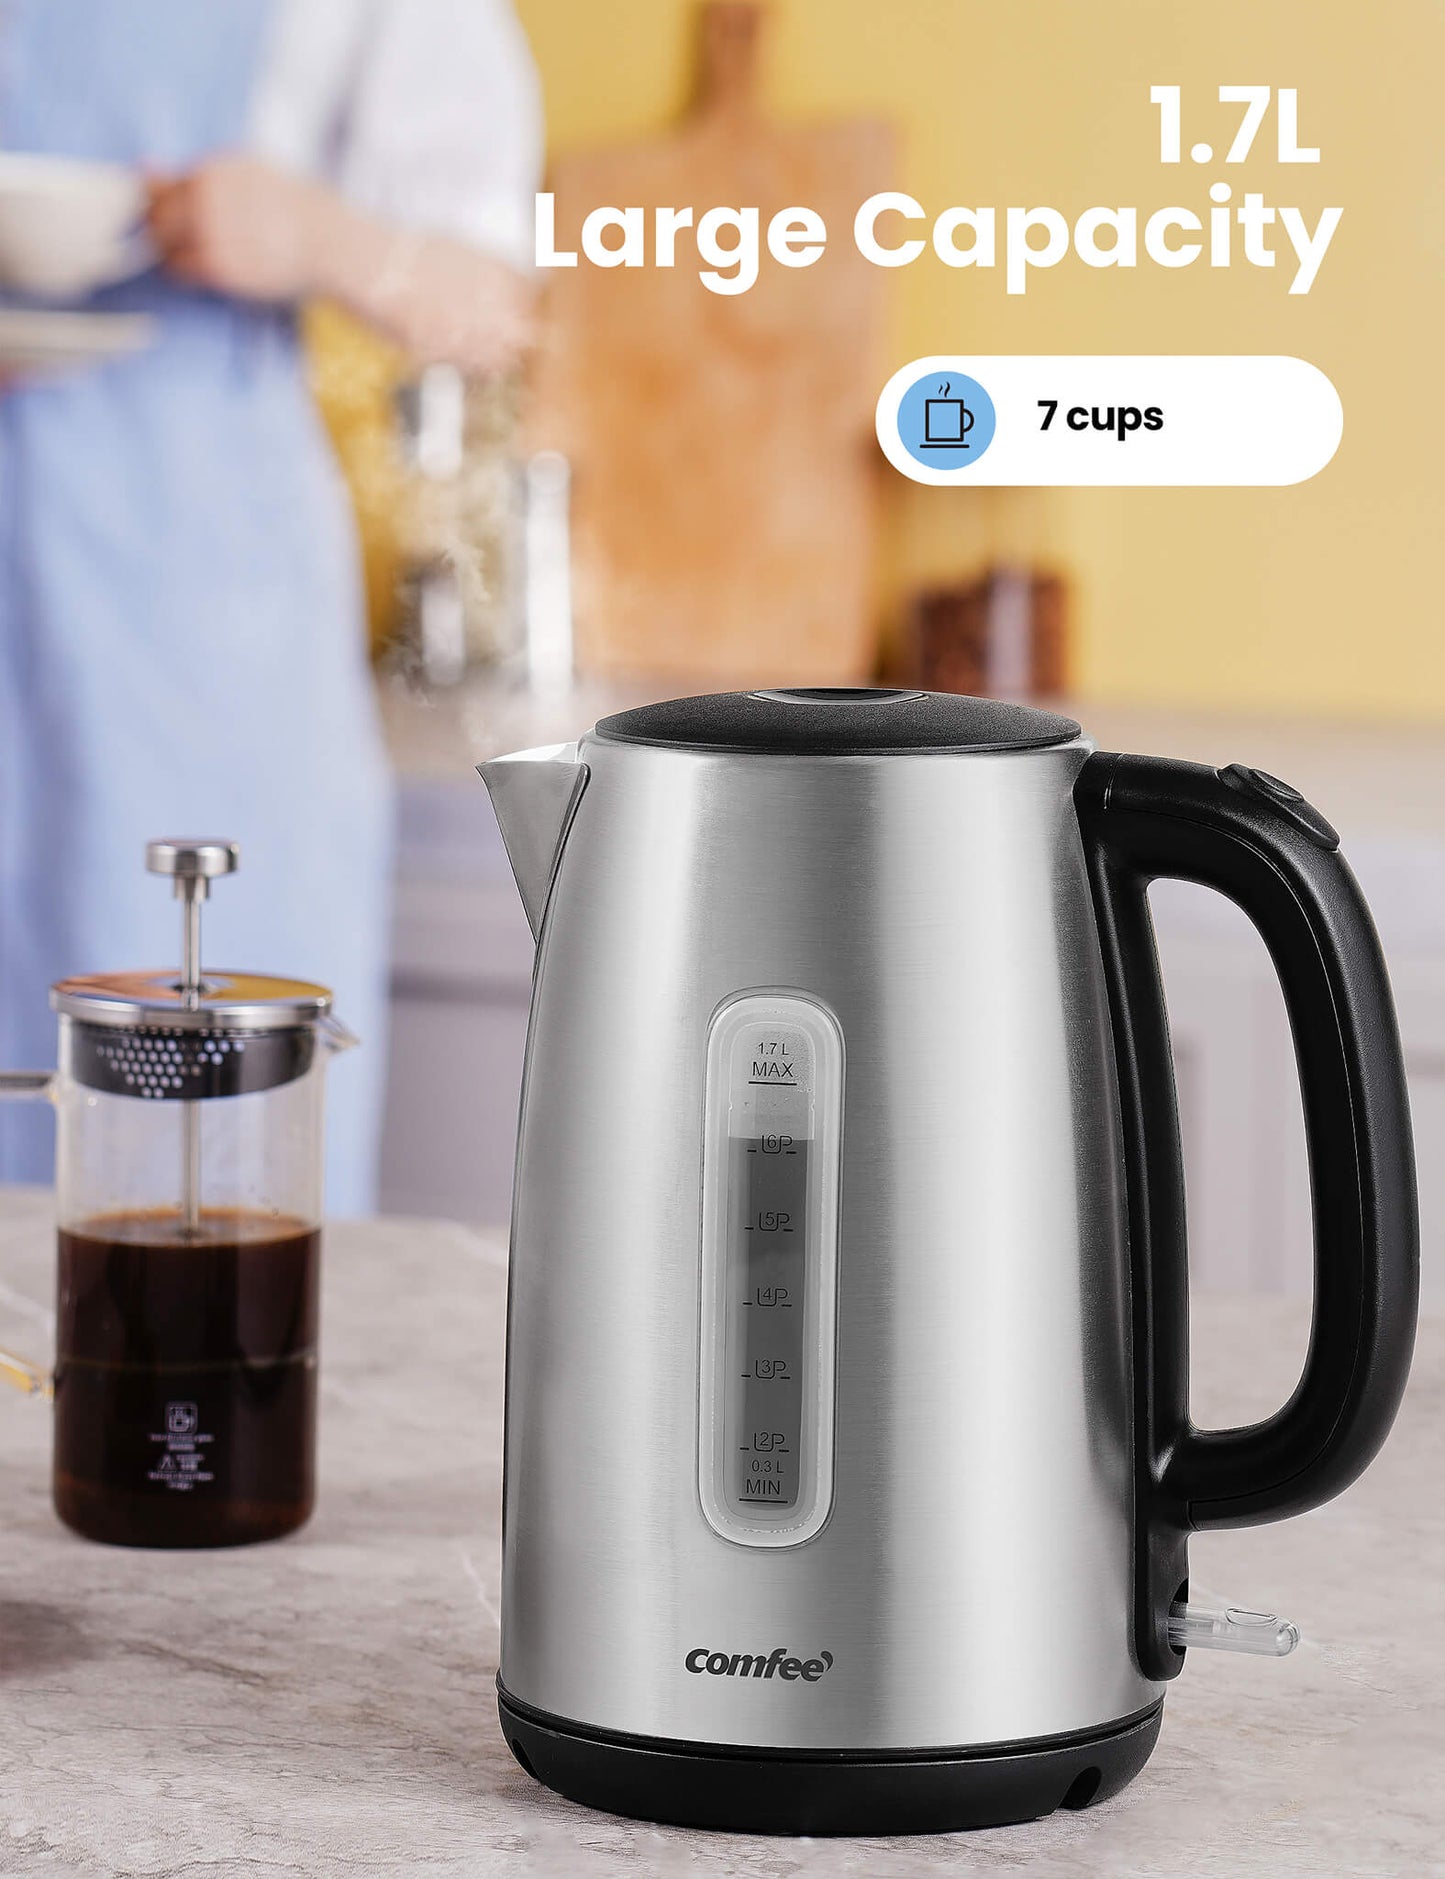 CEKS001 COMFEE' Stainless Steel Cordless Electric Kettle. 1500W